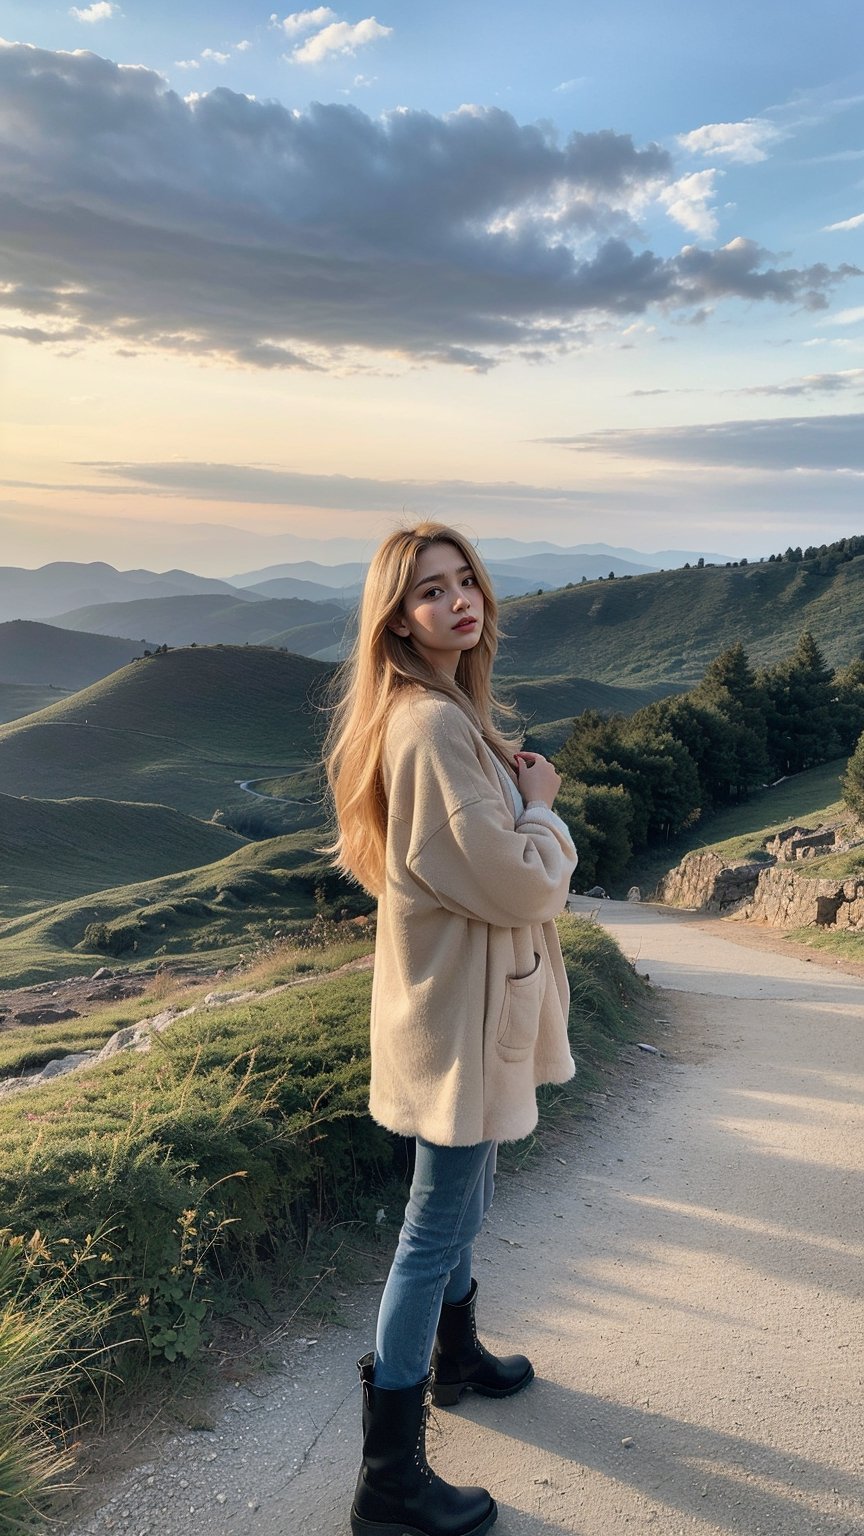 A solo blonde-haired girl stands confidently in a scenic landscape, her long locks blowing gently in the breeze as she gazes out at the expansive sky filled with fluffy clouds. She wears rugged boots that add to her adventurous aura, surrounded by the serene and unspoiled natural beauty of the day.